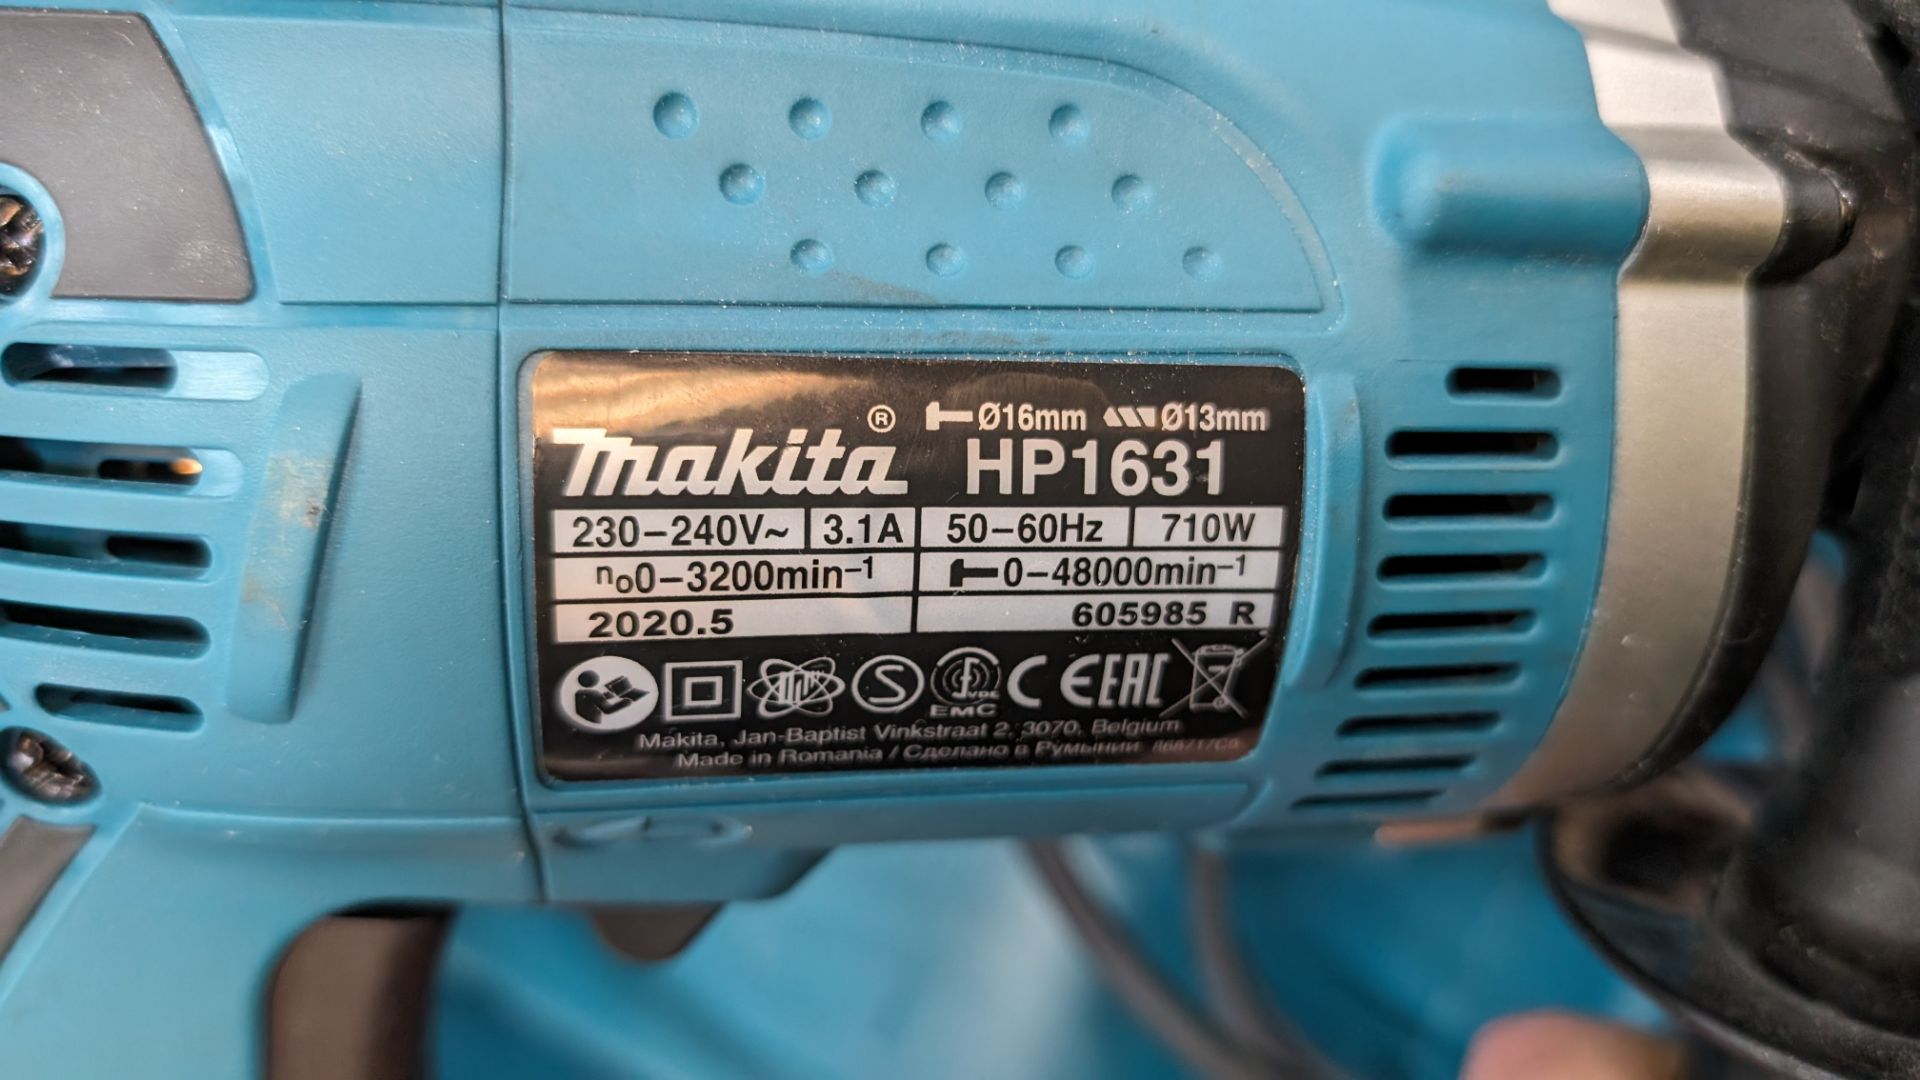 Makita drill model HP1631 in dedicated case with fixings storage - Image 7 of 9